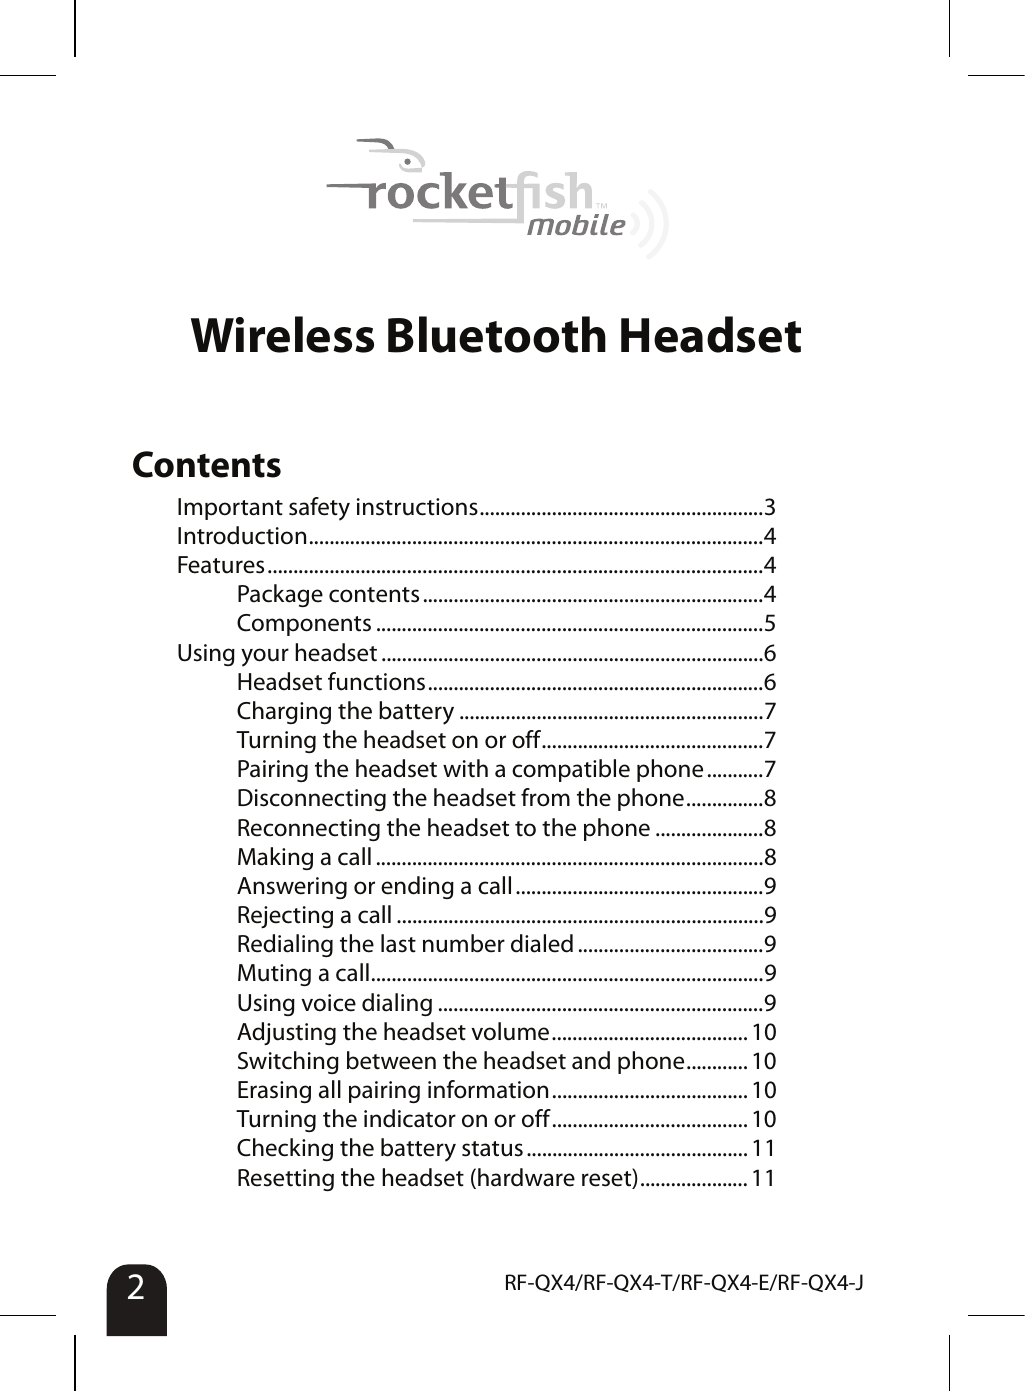 2RF-QX4/RF-QX4-T/RF-QX4-E/RF-QX4-JWireless Bluetooth HeadsetContentsImportant safety instructions.......................................................3Introduction........................................................................................4Features................................................................................................4Package contents..................................................................4Components ...........................................................................5Using your headset ..........................................................................6Headset functions.................................................................6Charging the battery ...........................................................7Turning the headset on or off...........................................7Pairing the headset with a compatible phone...........7Disconnecting the headset from the phone...............8Reconnecting the headset to the phone .....................8Making a call...........................................................................8Answering or ending a call................................................9Rejecting a call .......................................................................9Redialing the last number dialed....................................9Muting a call............................................................................9Using voice dialing ...............................................................9Adjusting the headset volume...................................... 10Switching between the headset and phone............ 10Erasing all pairing information...................................... 10Turning the indicator on or off...................................... 10Checking the battery status ...........................................11Resetting the headset (hardware reset)..................... 11